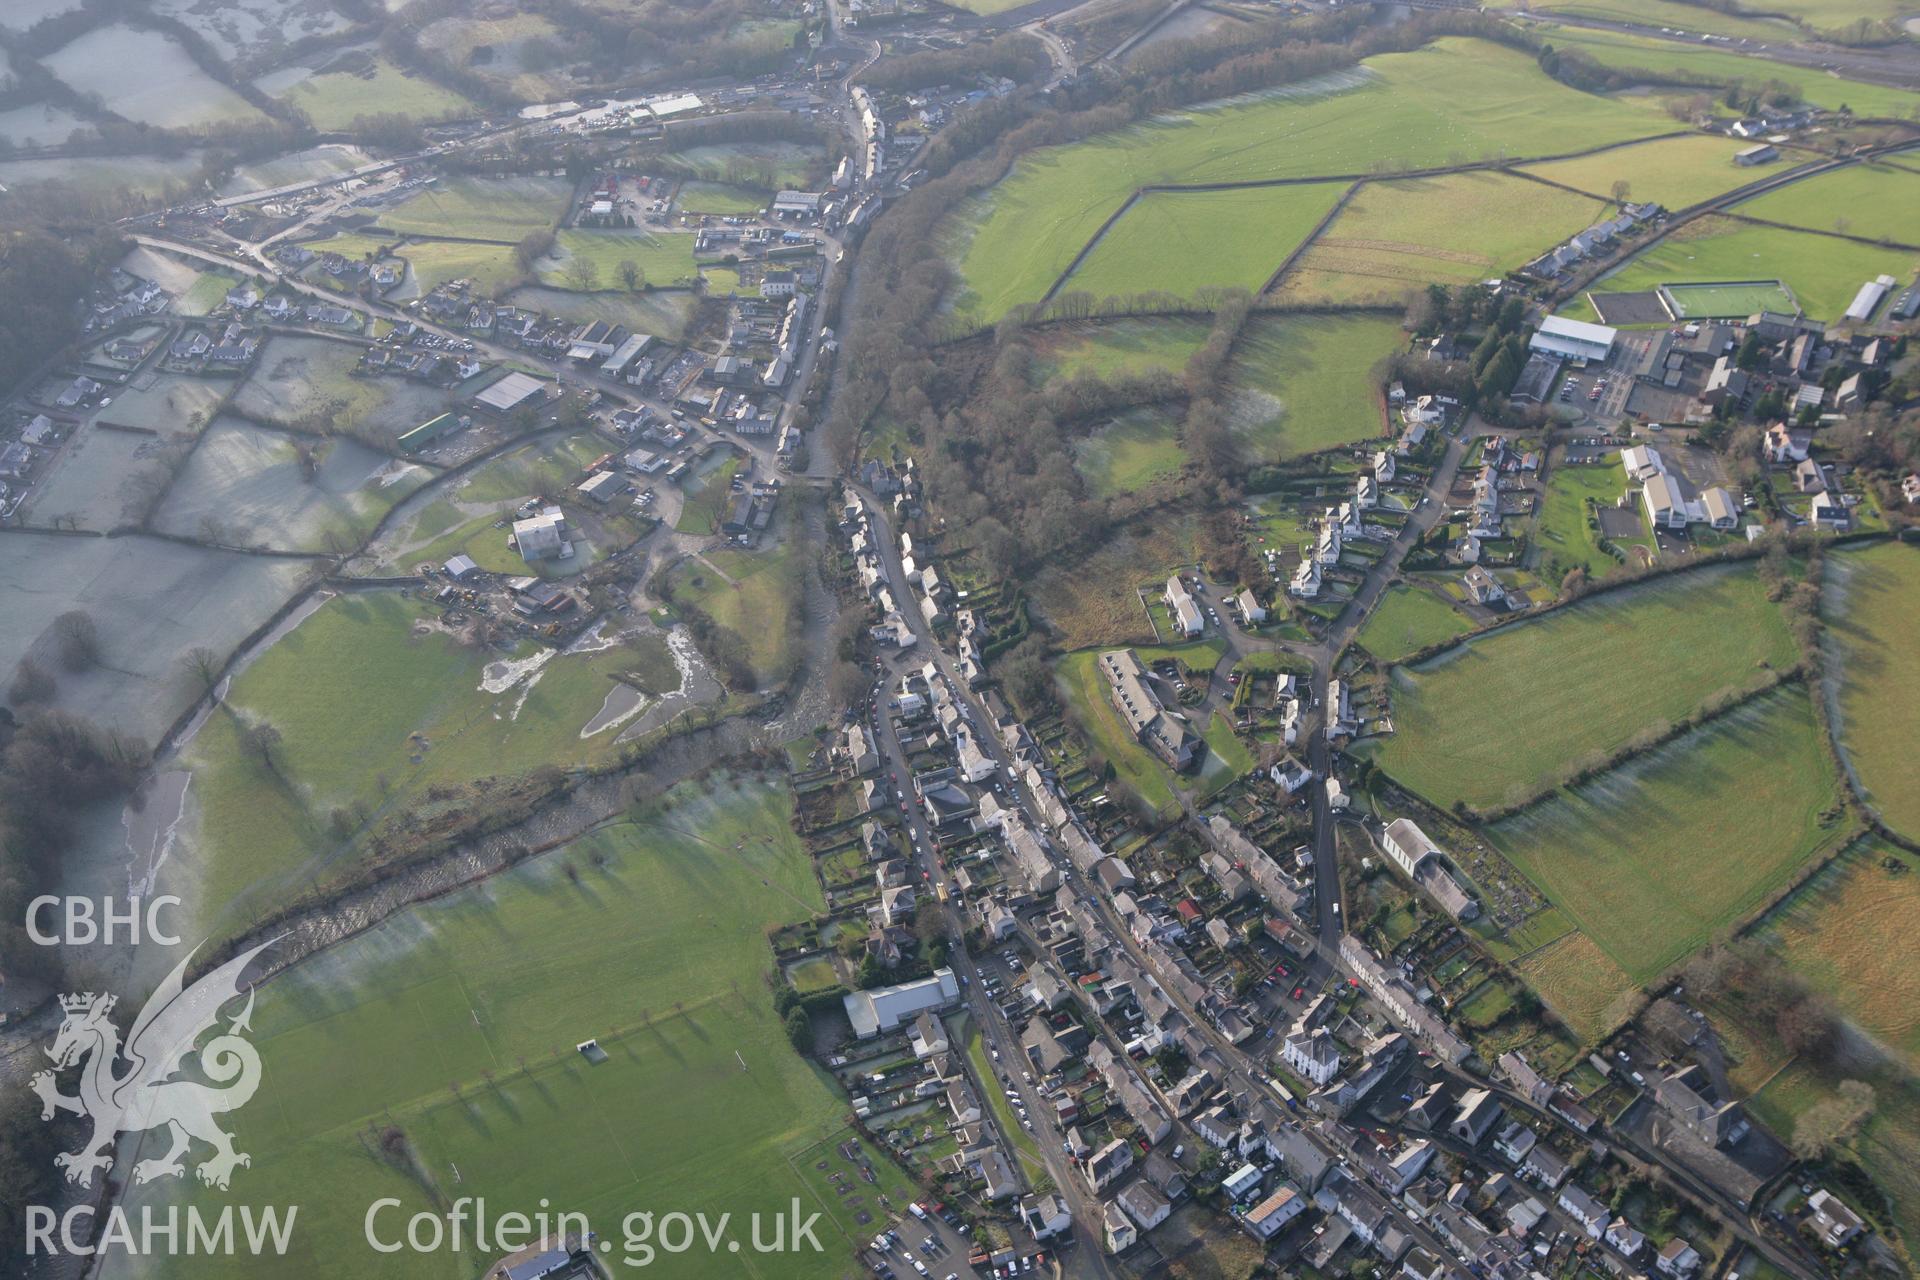 RCAHMW colour oblique photograph of Llandysul town. Taken by Toby Driver on 15/12/2008.